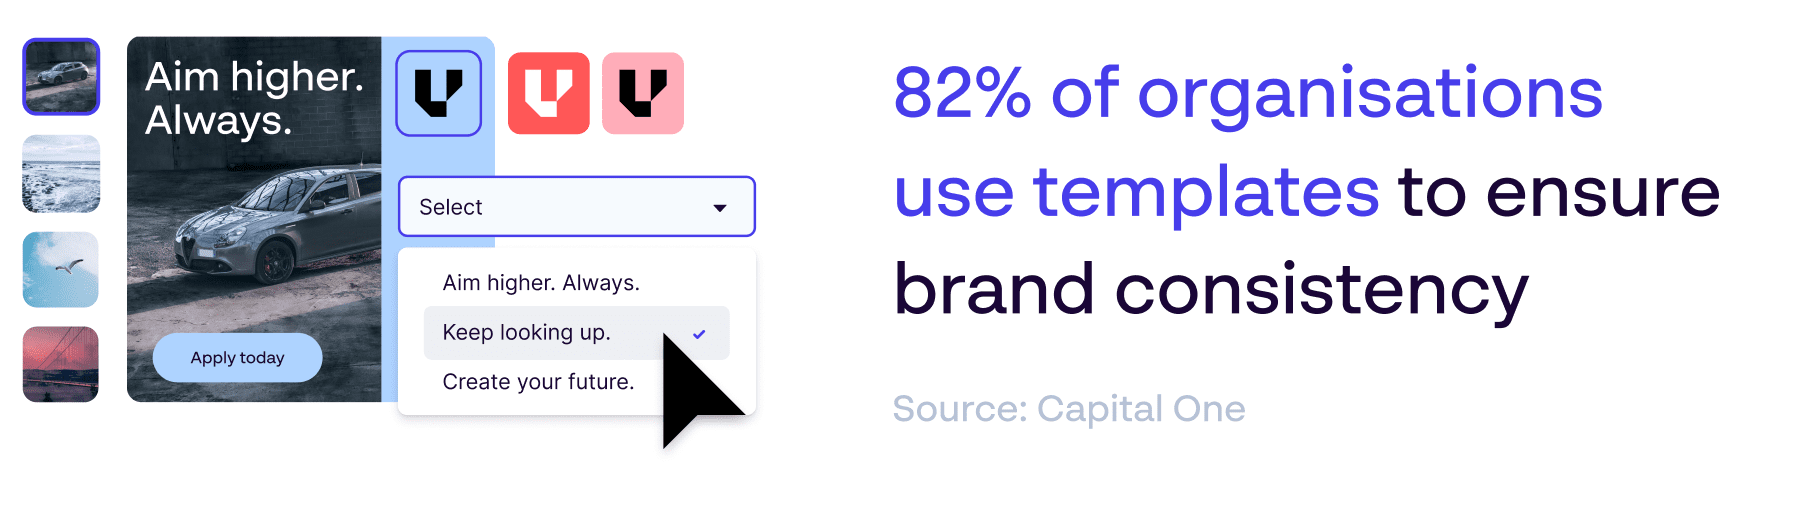 “Brand templates are being used by 82% of companies to ensure brand consistency. Source: Capital One”